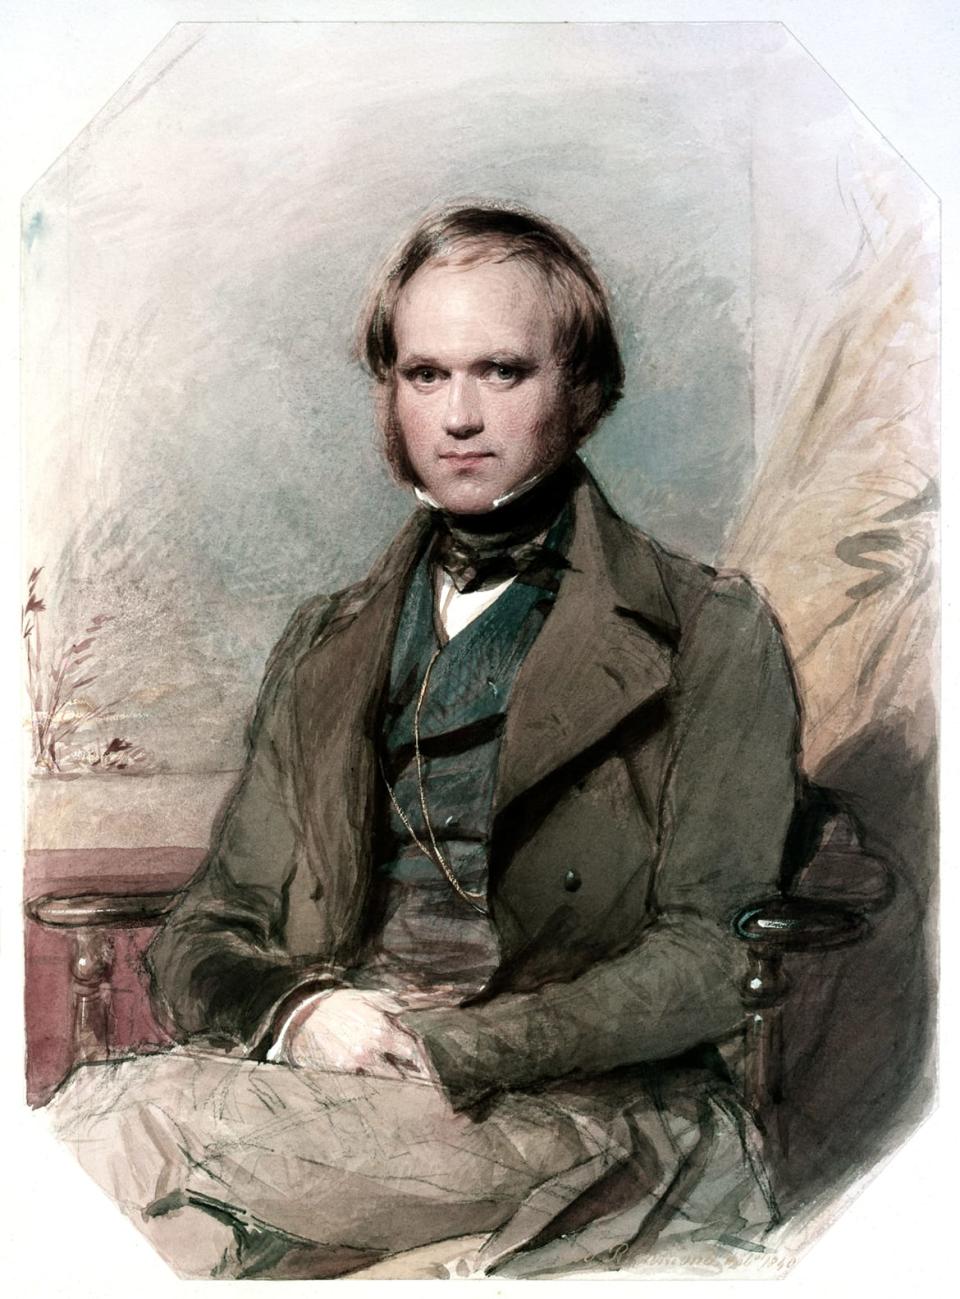 <div class="inline-image__caption"><p>A young Charles Darwin in 1840.</p></div> <div class="inline-image__credit">GraphicaArtis/Getty Images</div>